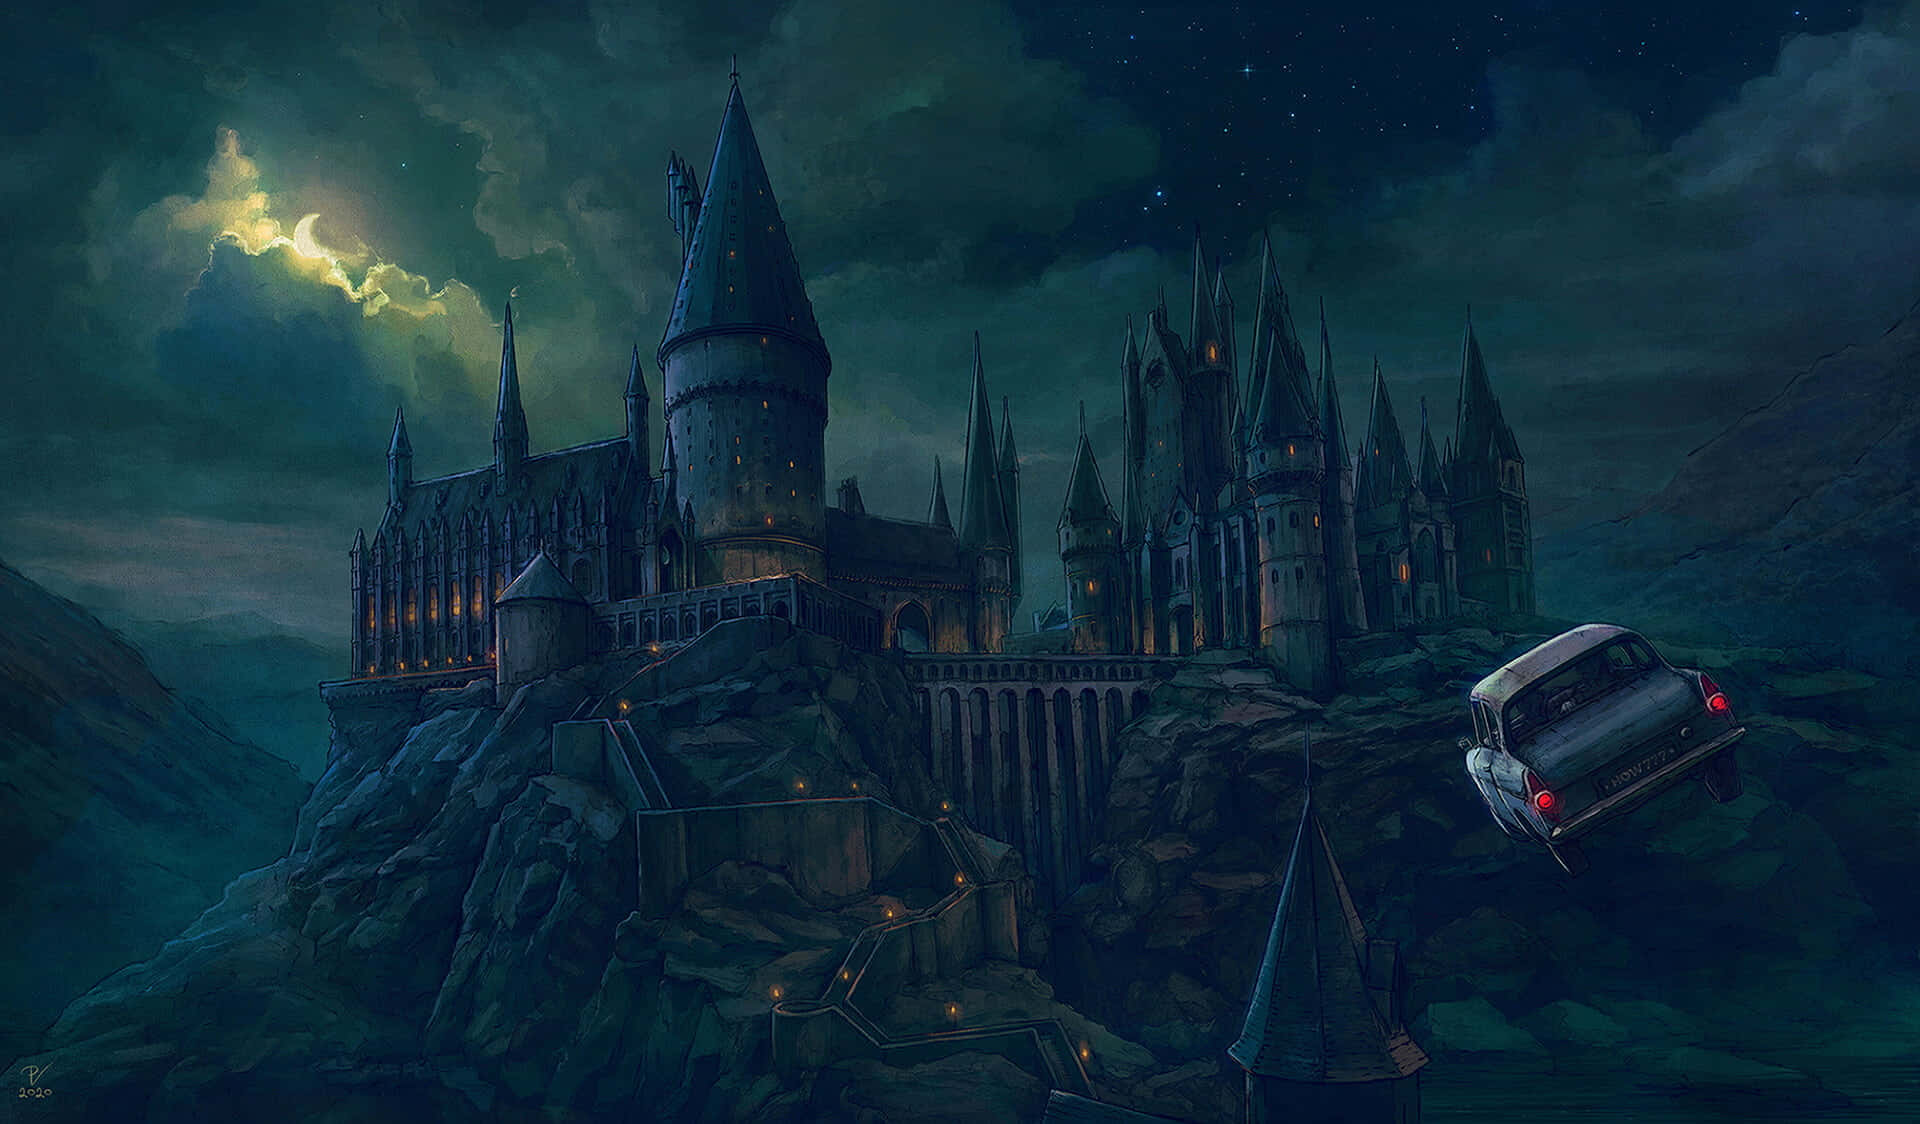 Welcome to Hogwarts School of Witchcraft and Wizardry